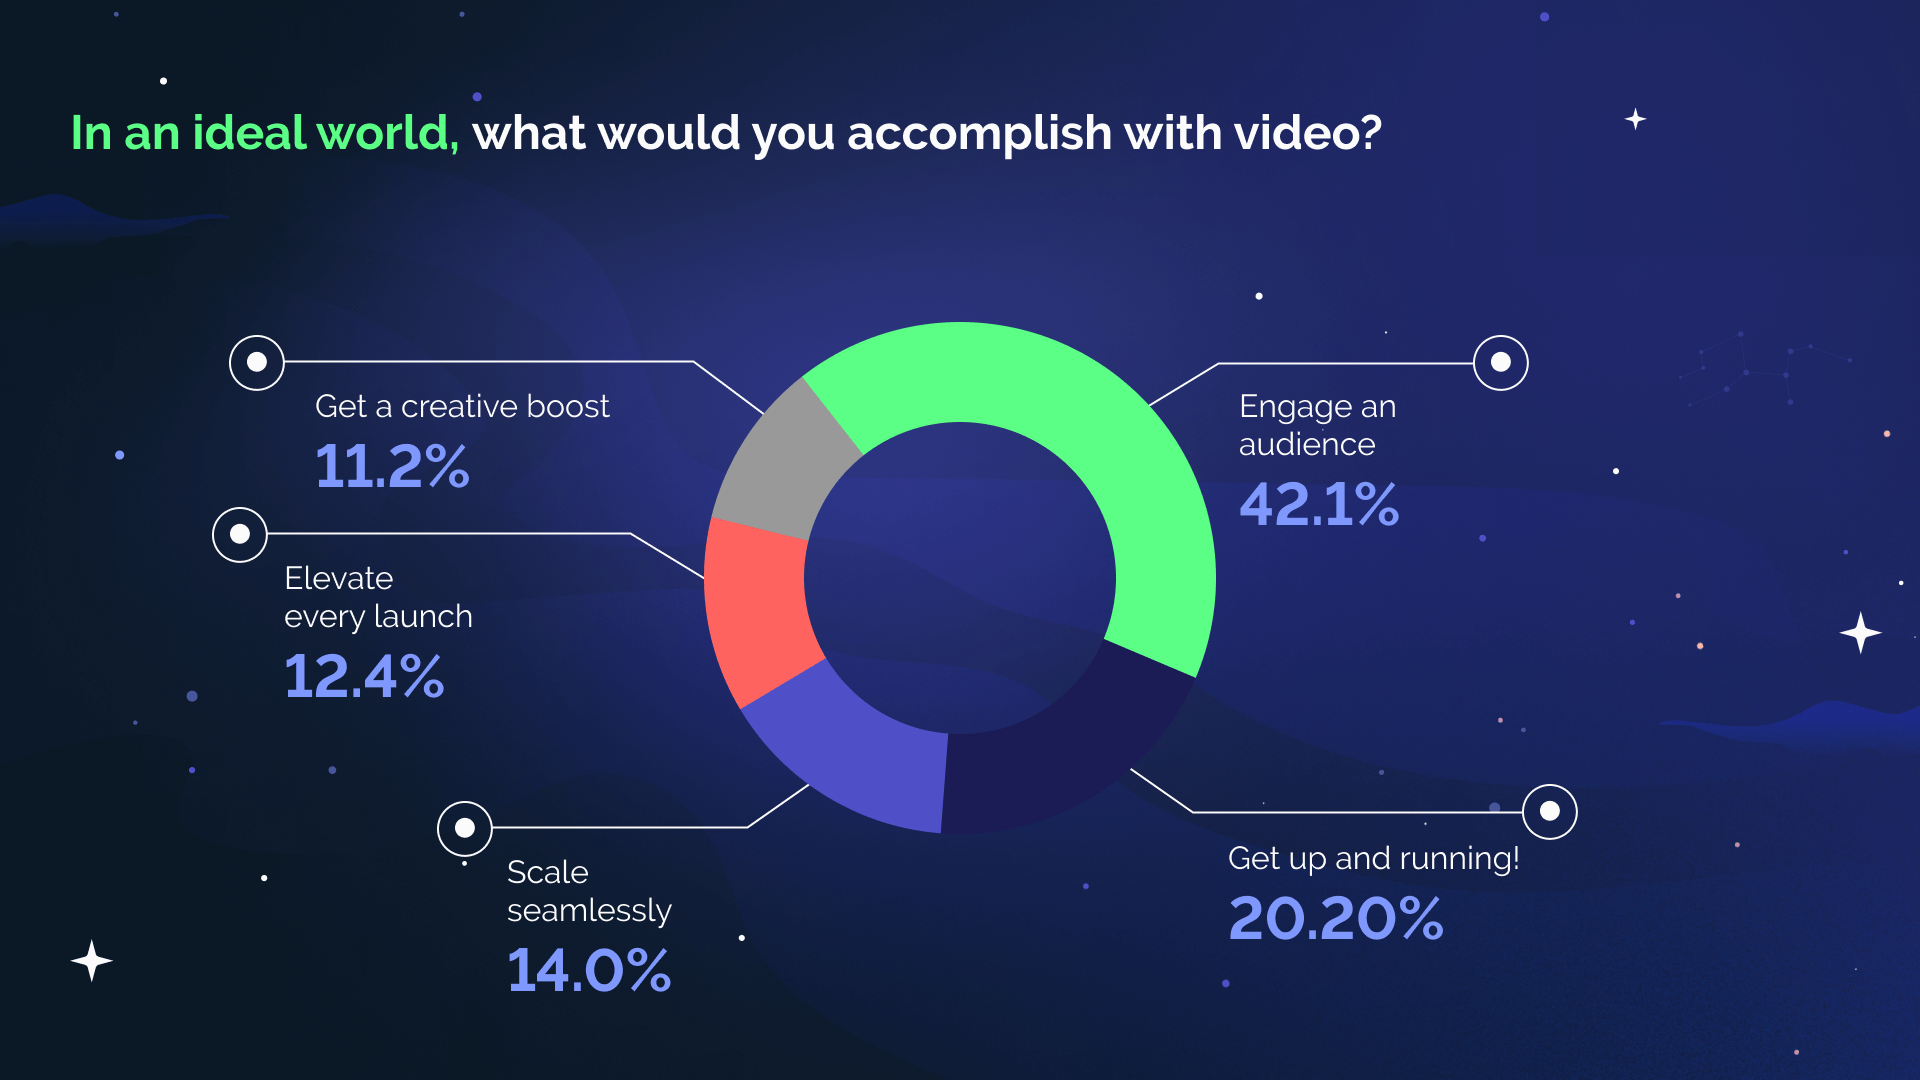 In an ideal world, what would you accomplish with video?